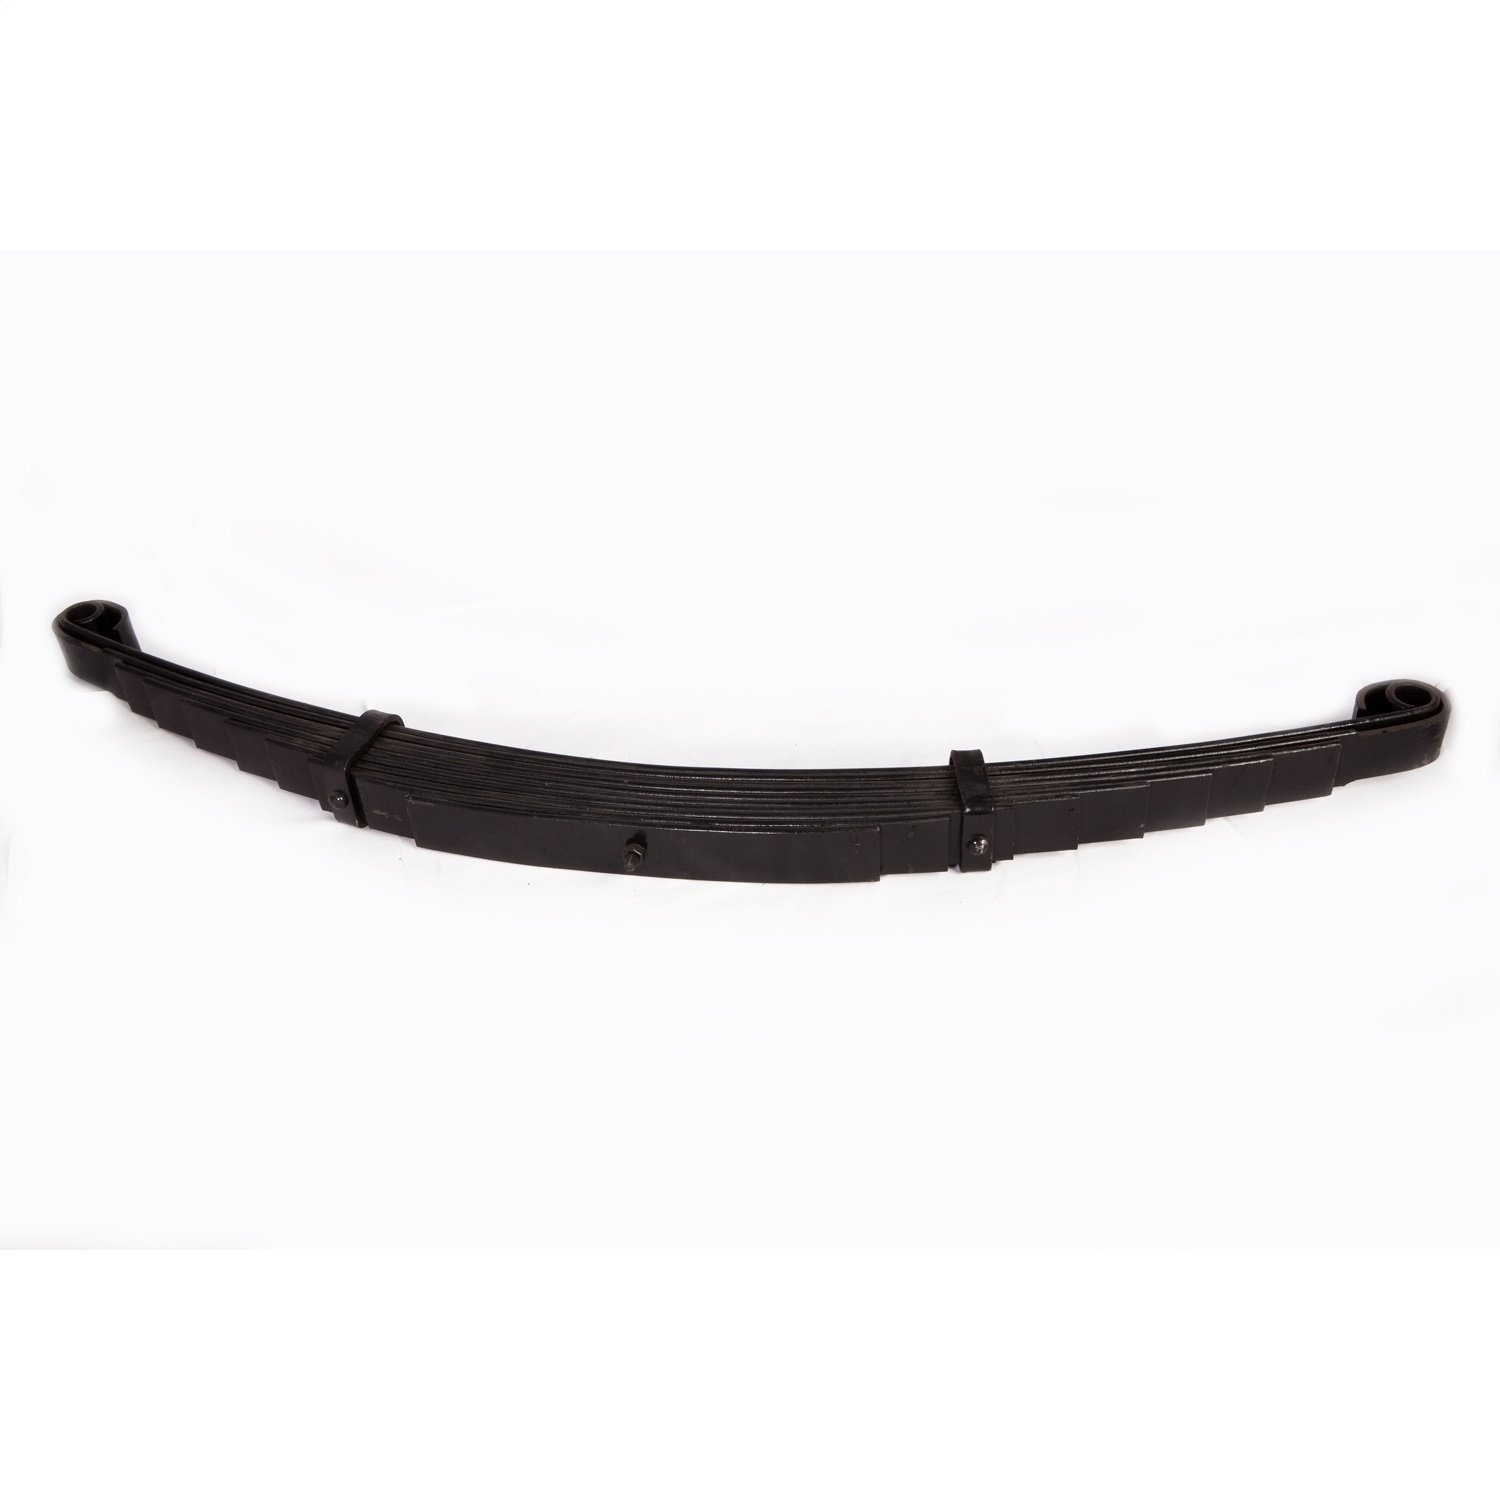 Stock replacement 9-leaf rear spring from Omix-ADA, Fits 55-75 Jeep CJ5 and CJ6